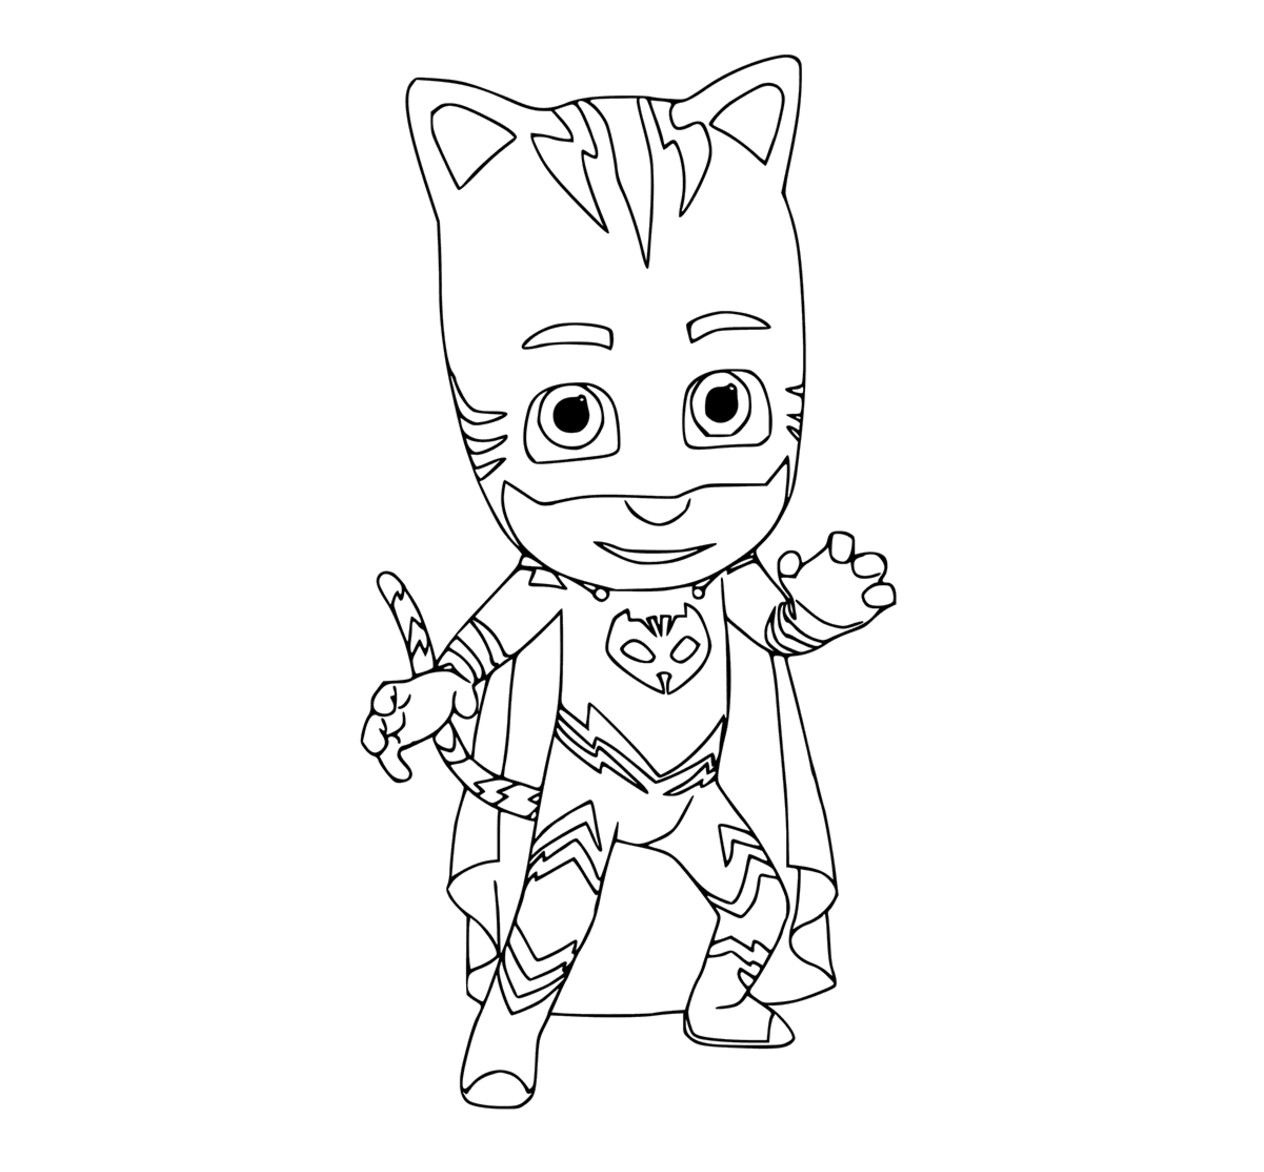 Pj Masks Coloring Pages To Print
 PJ Masks coloring pages to and print for free